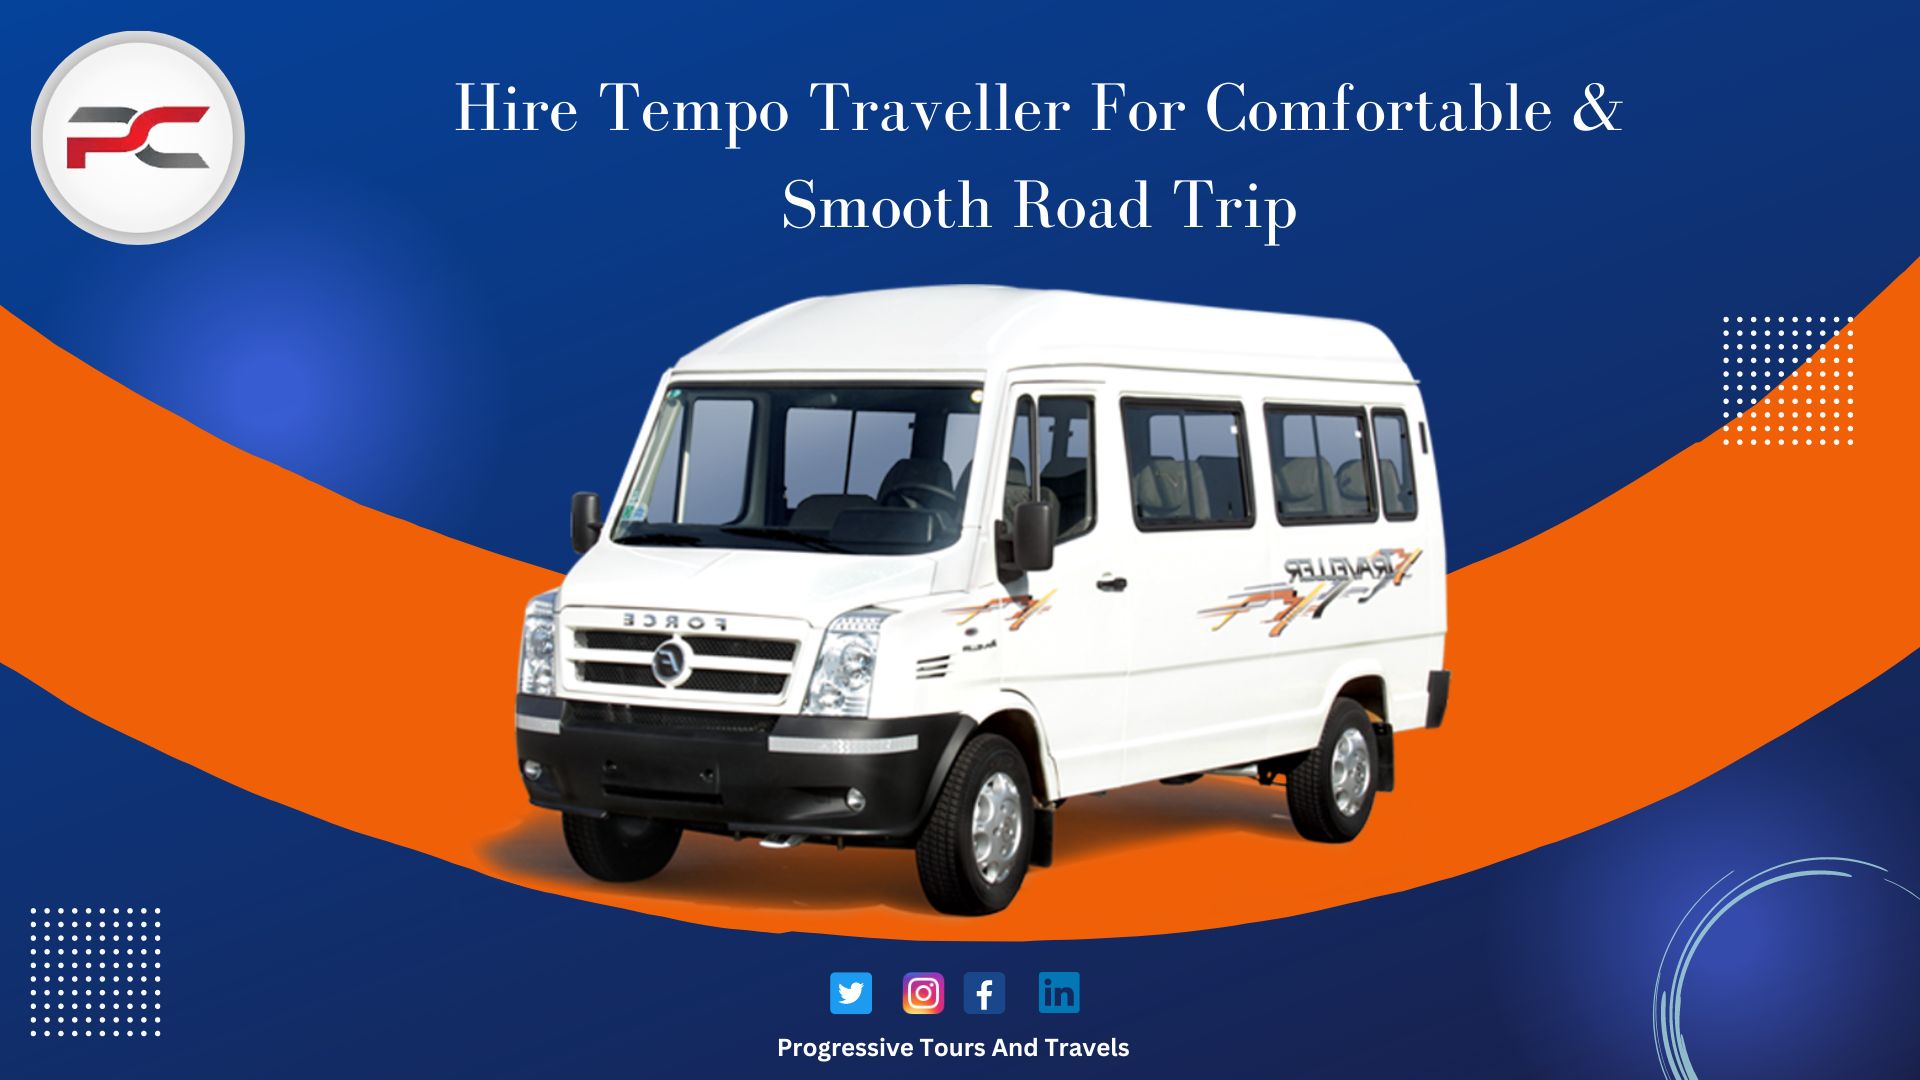 Hire a tempo traveller on rent in Delhi for a comfortable & Smooth Road Trip-a5d0547b